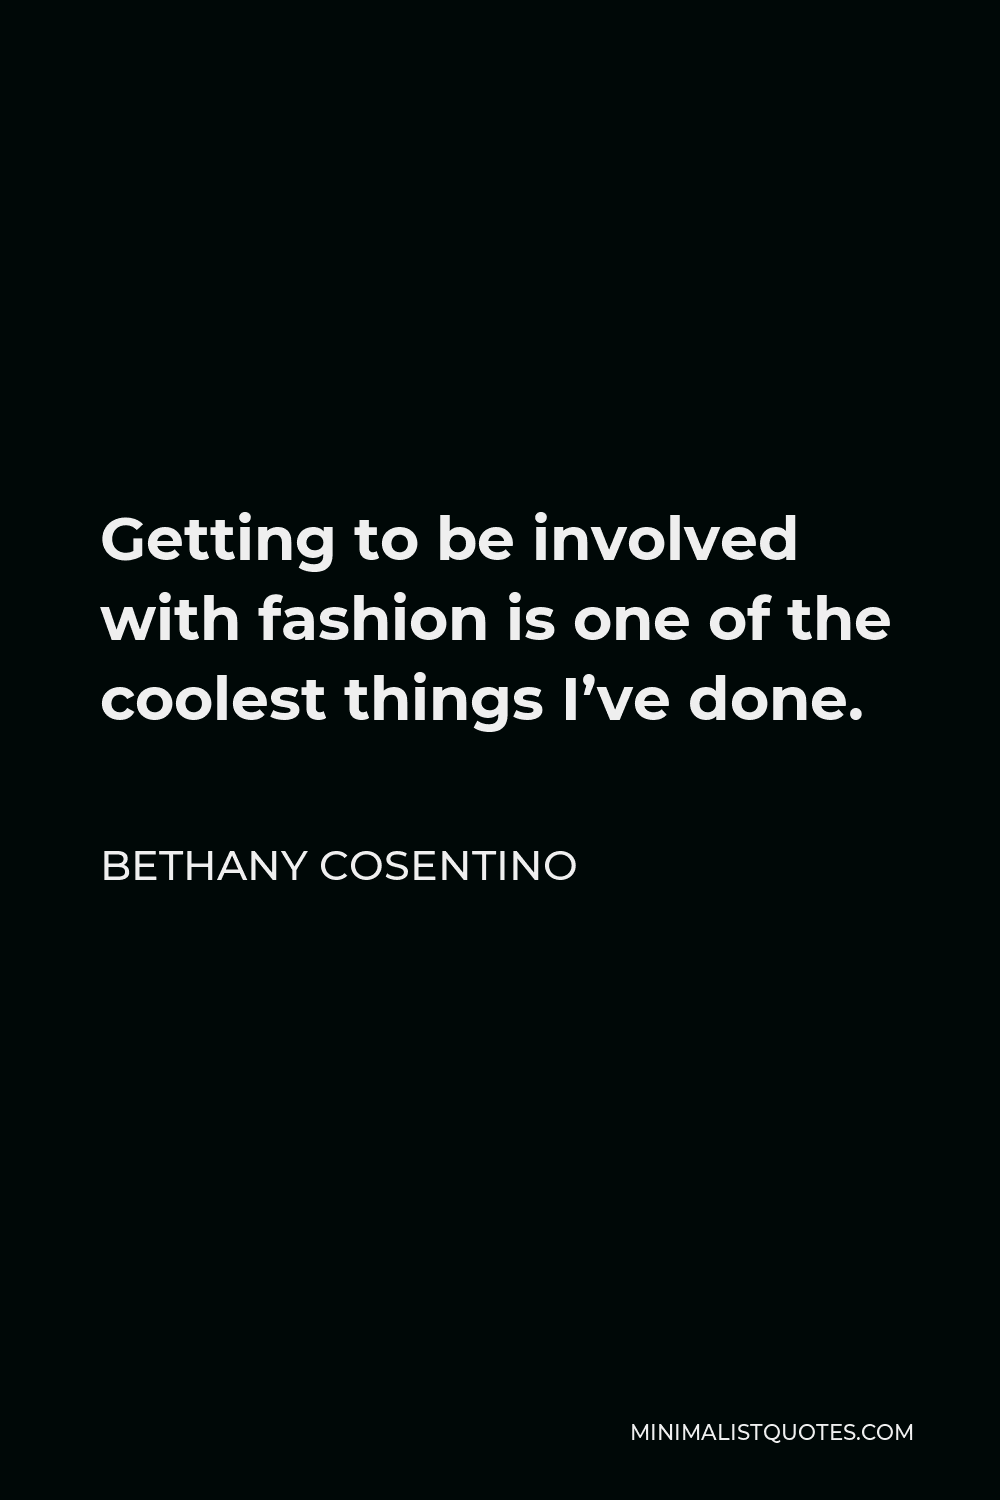 Bethany Cosentino Quote - Getting to be involved with fashion is one of the coolest things I’ve done.